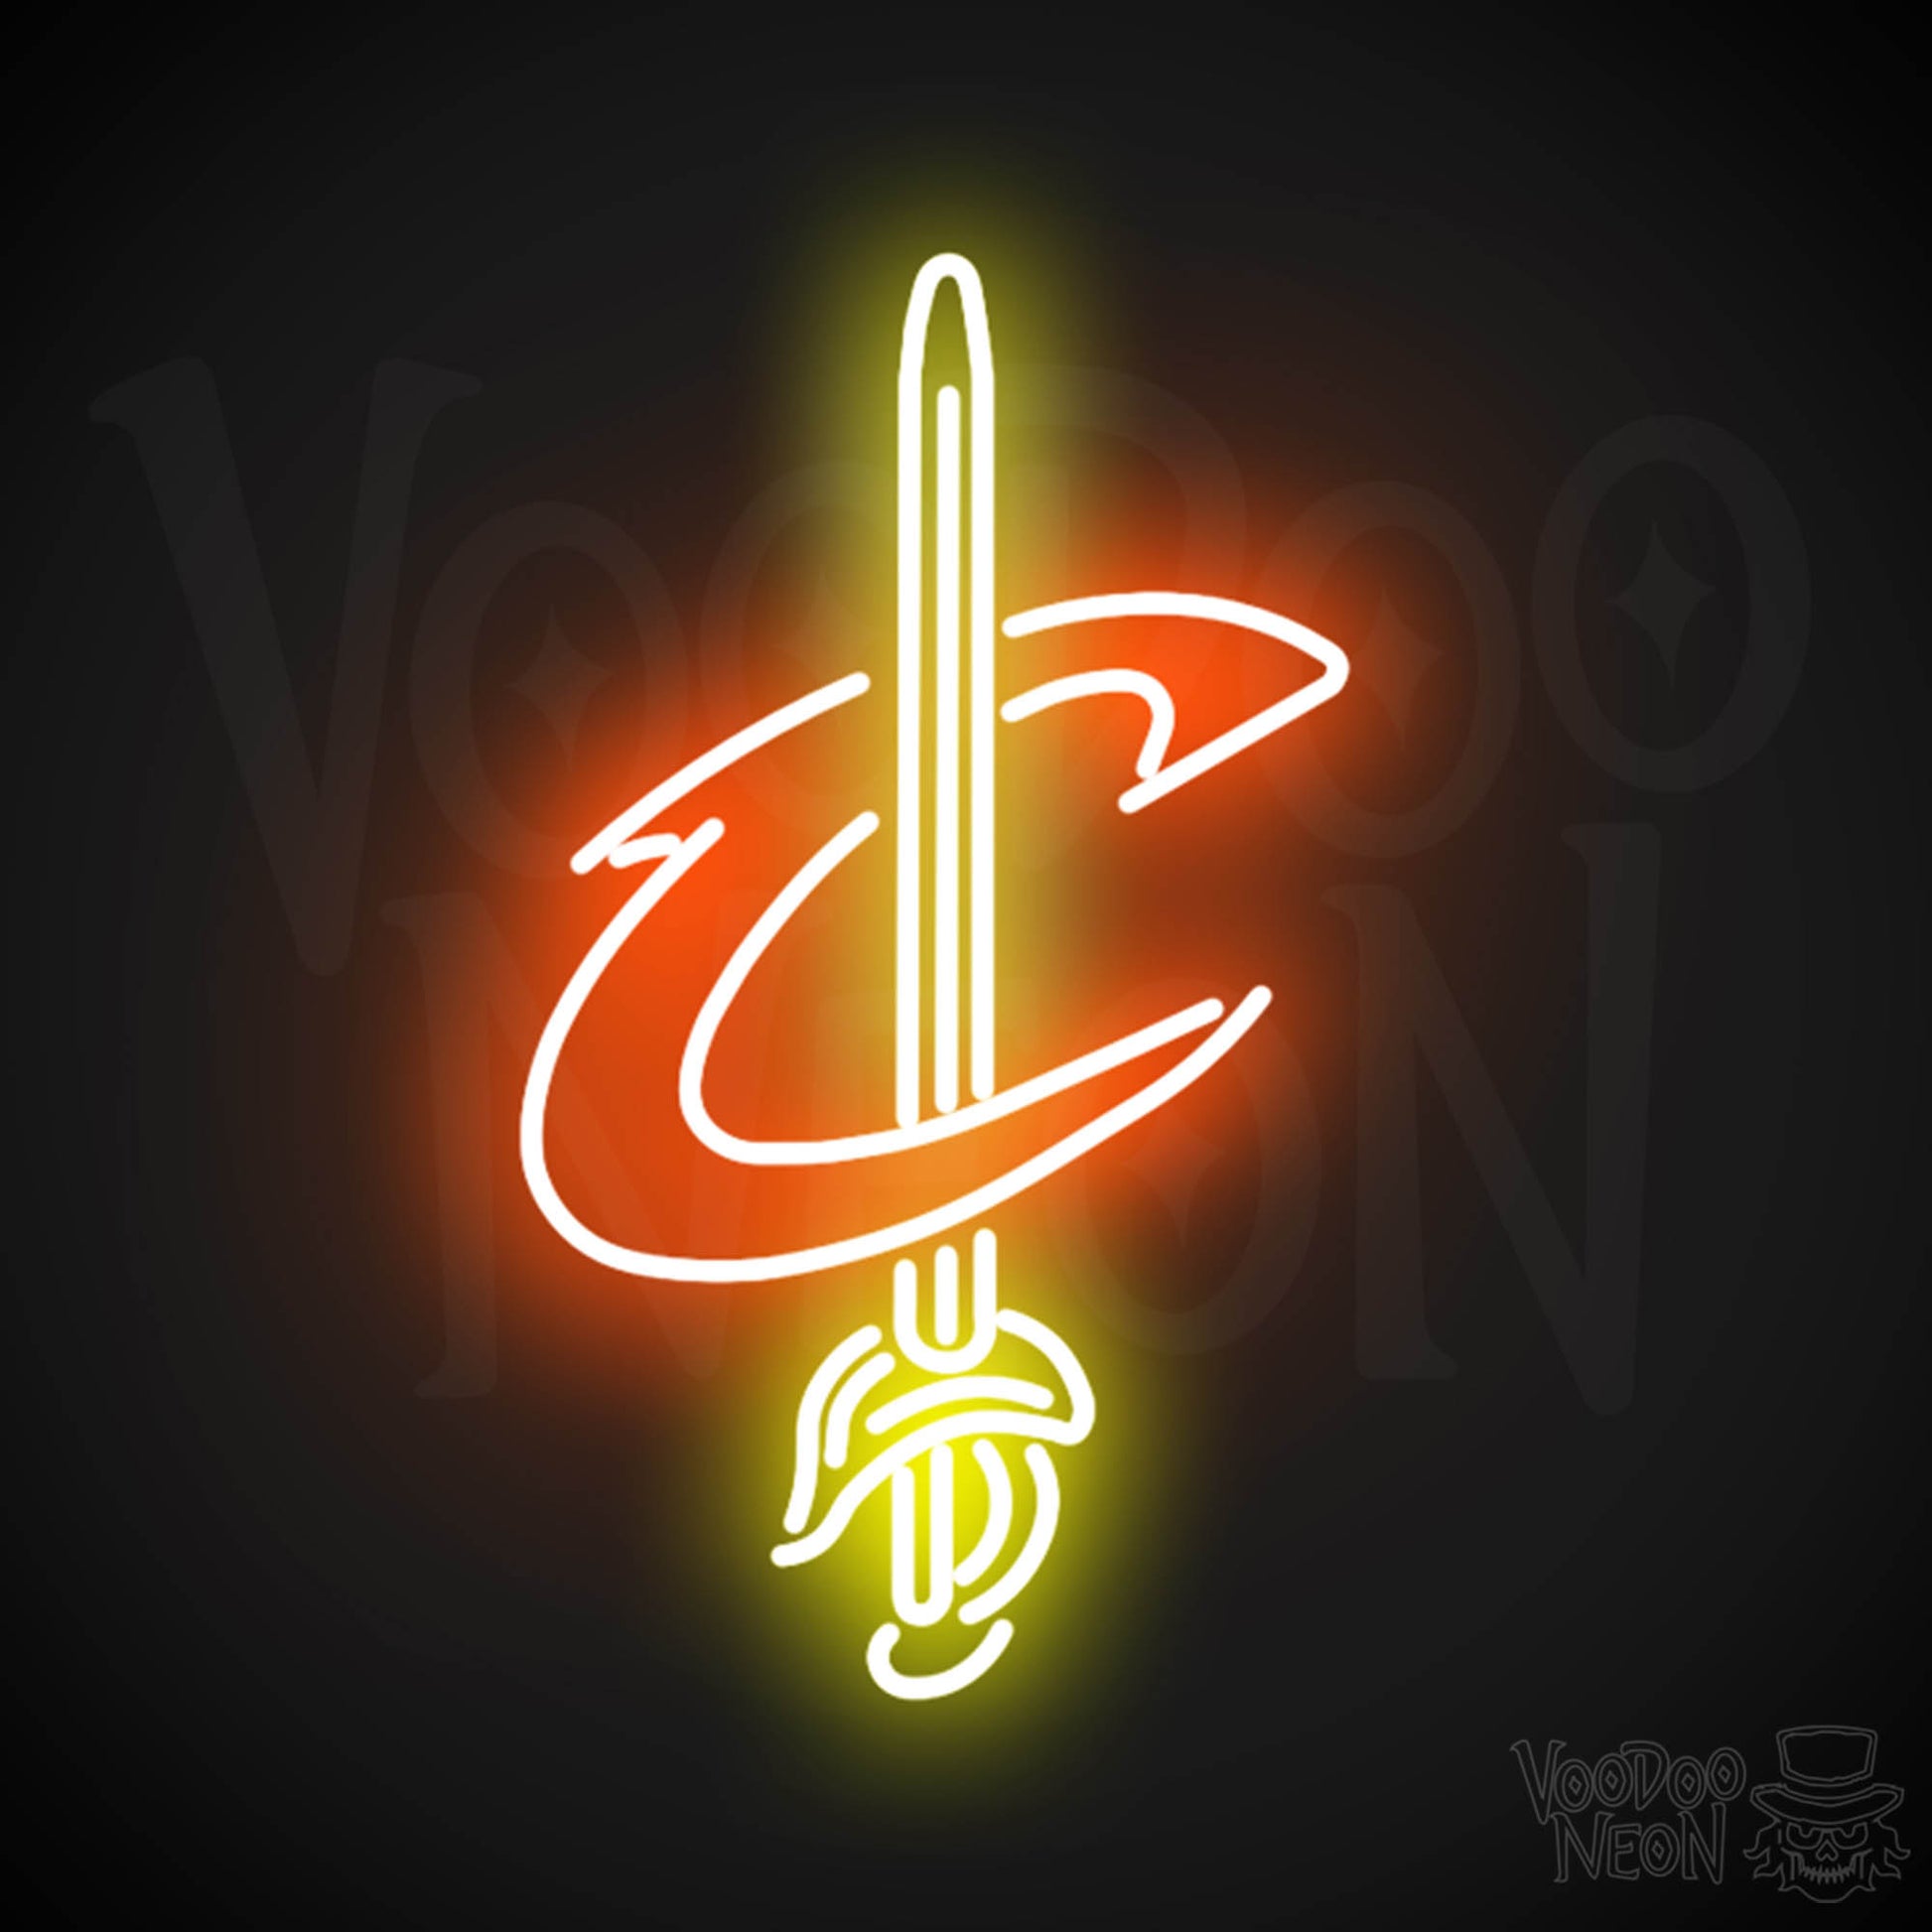 Cleveland Cavaliers Neon Sign - Cleveland Cavaliers Sign - Neon Cavaliers Wall Art - Color Multi-Color